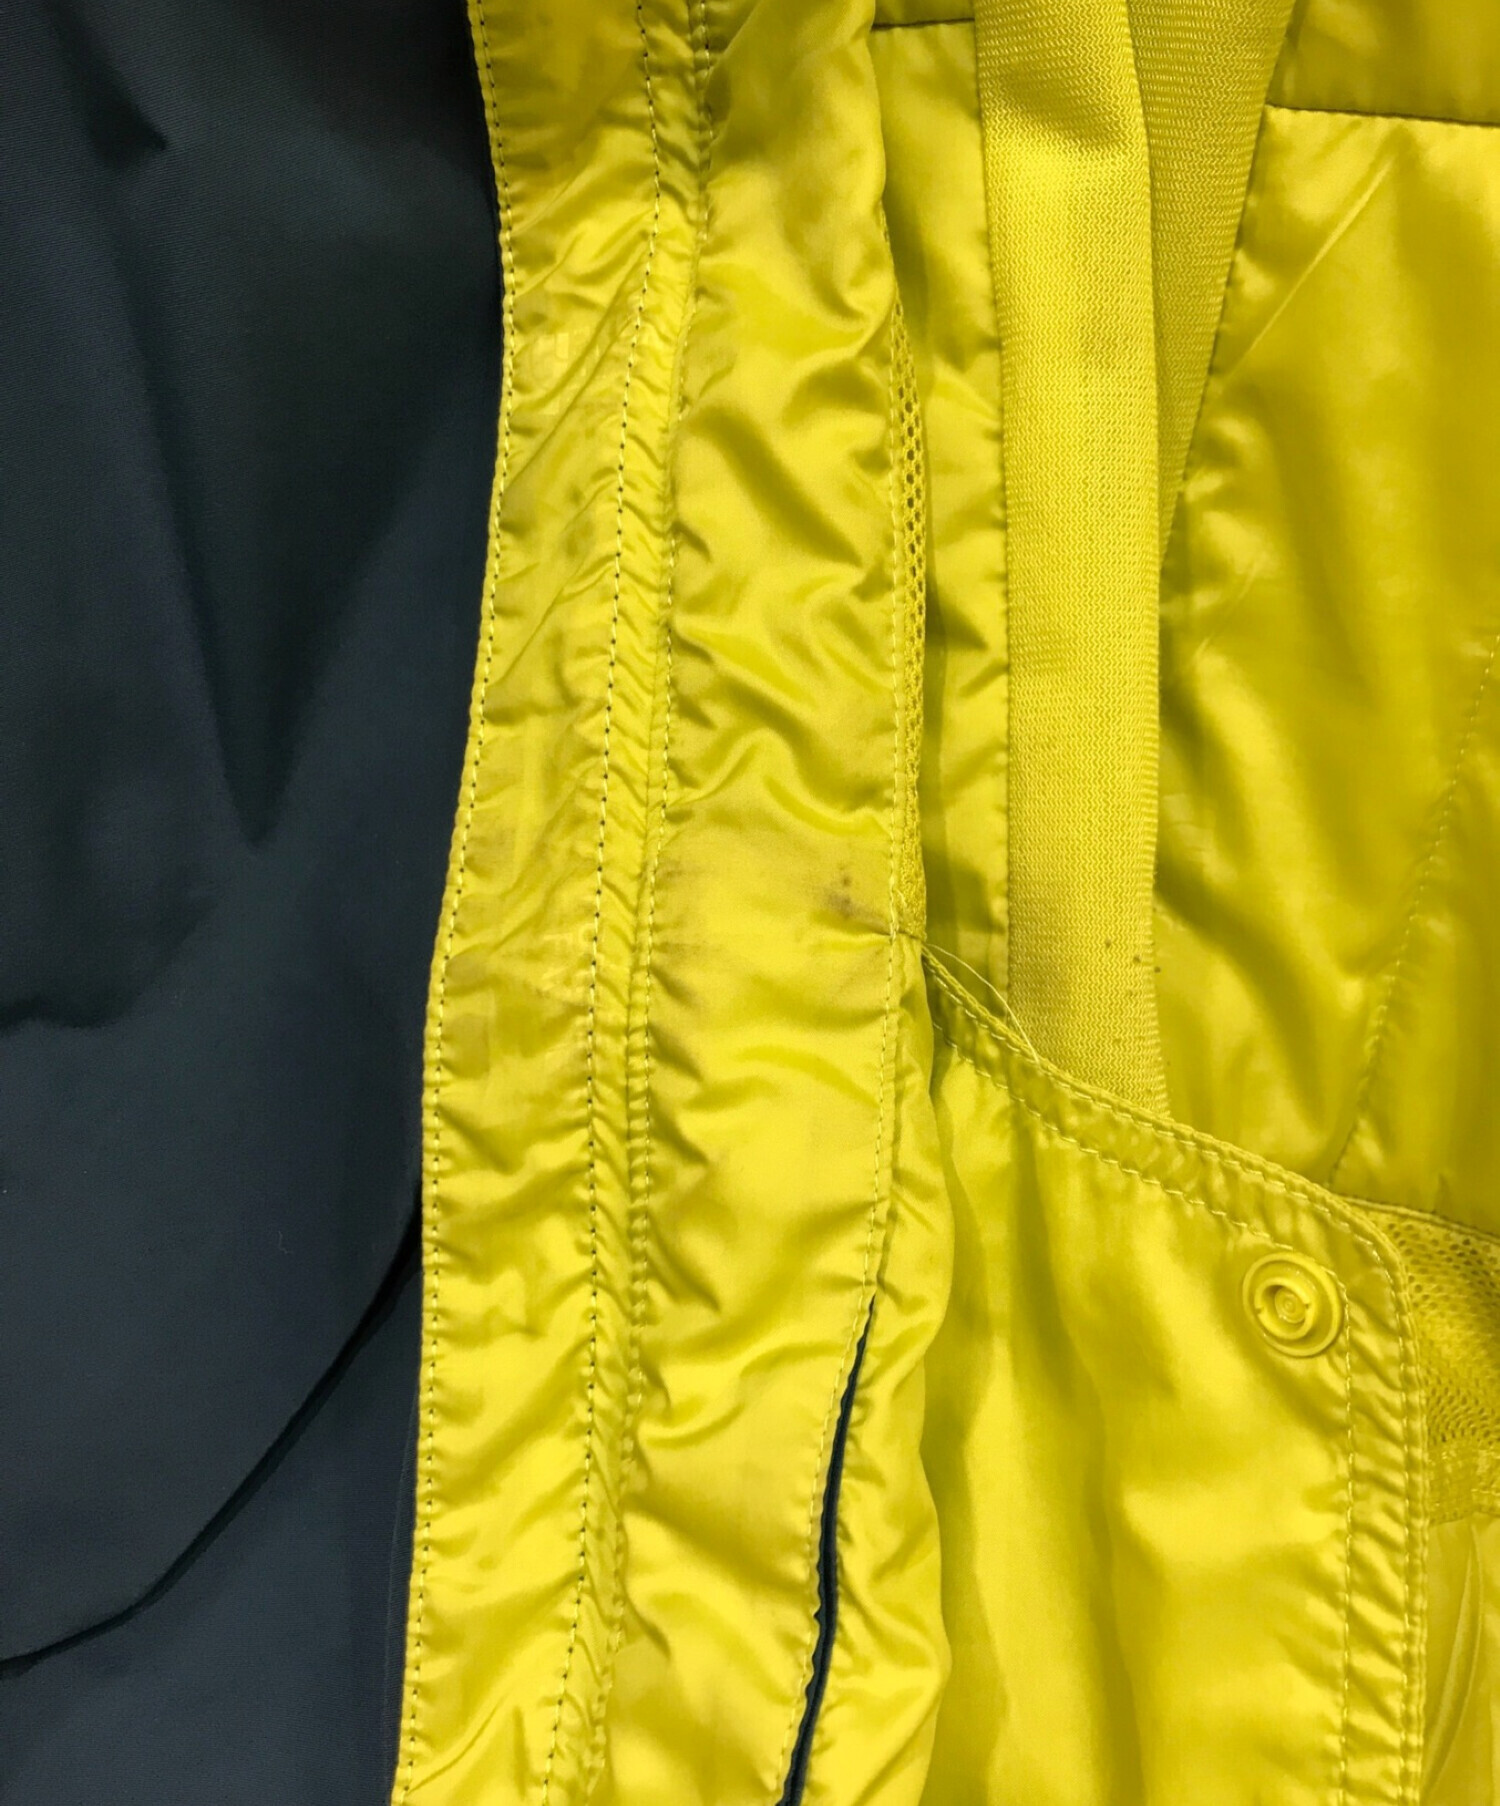 THE NORTH FACE (ザ ノース フェイス) DUBS INSULATED JACKET イエロー×グリーン サイズ:M